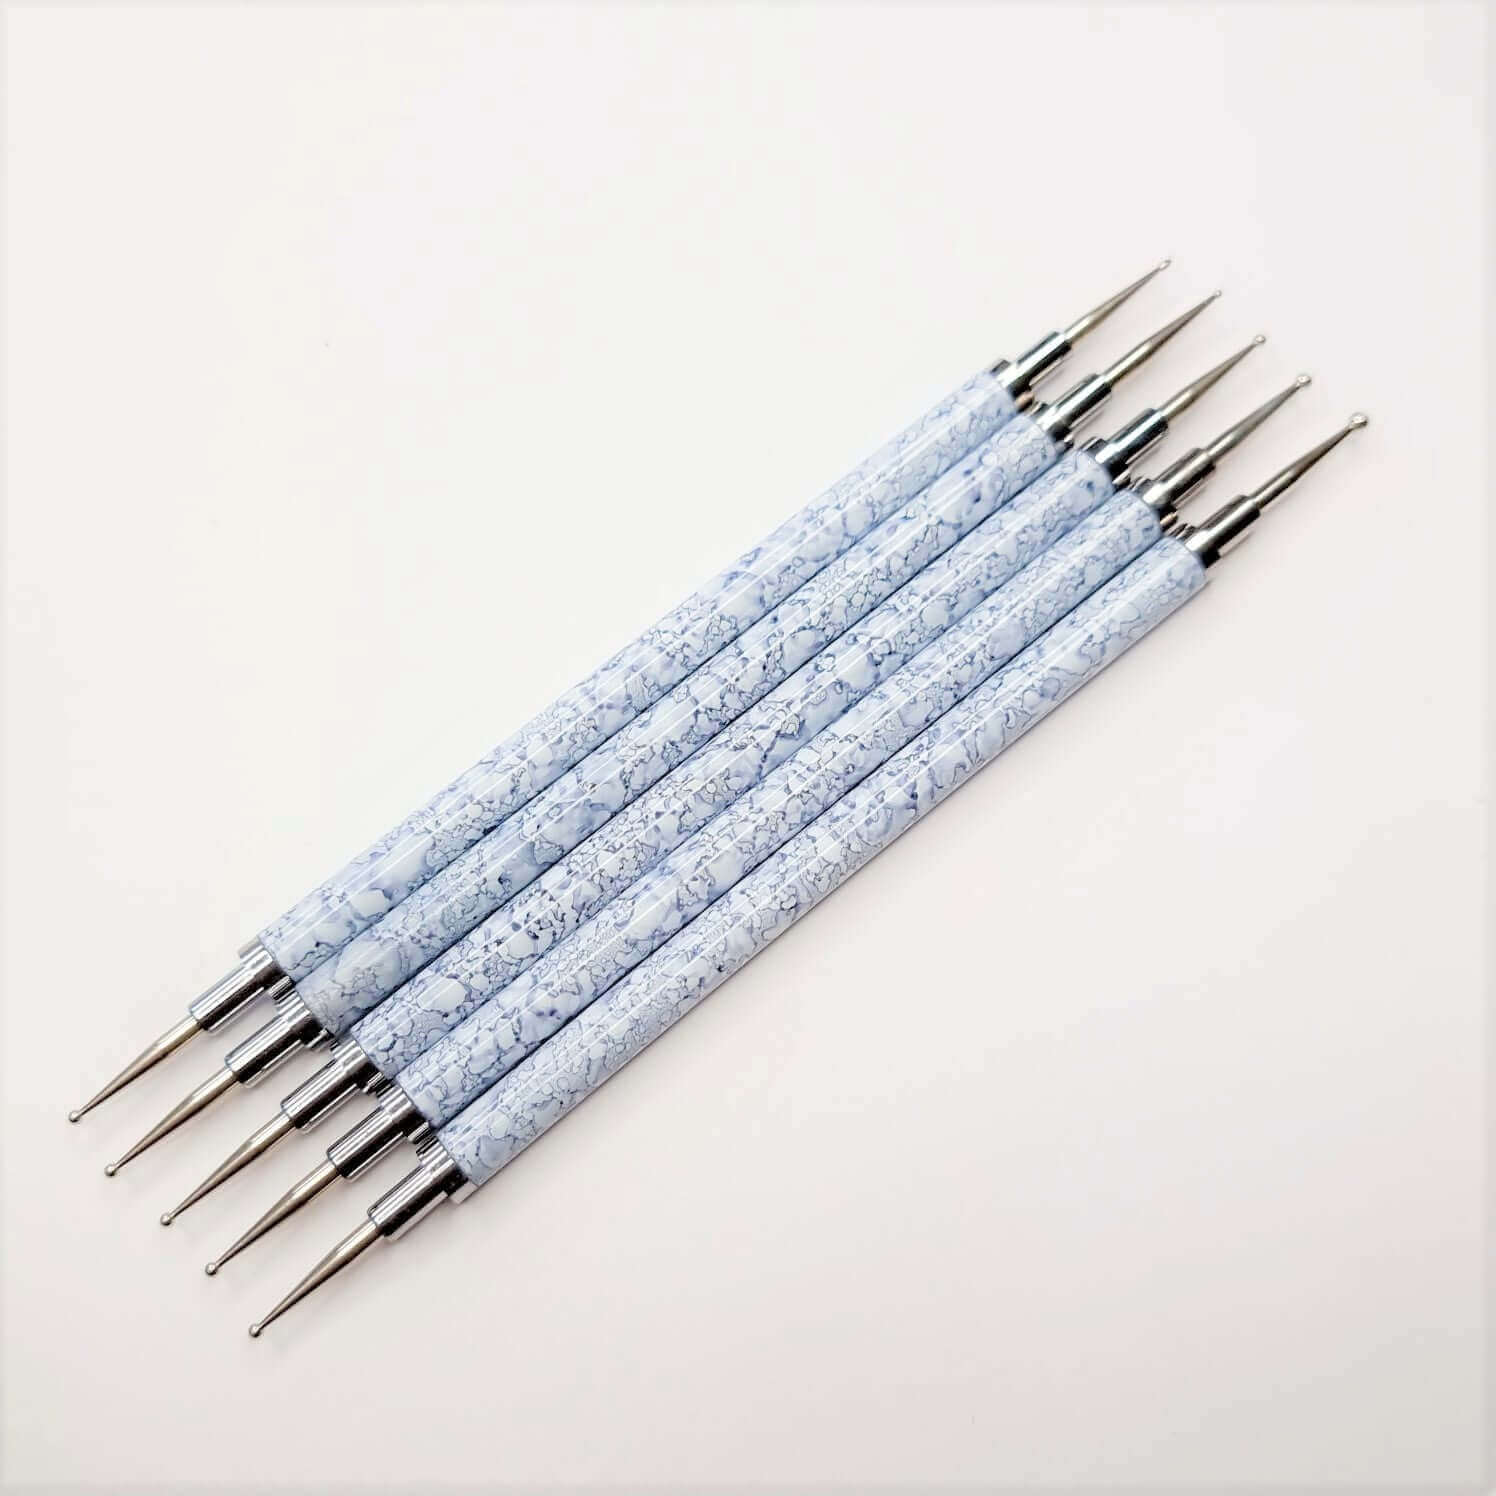 Double-ended Dotting Tool Set